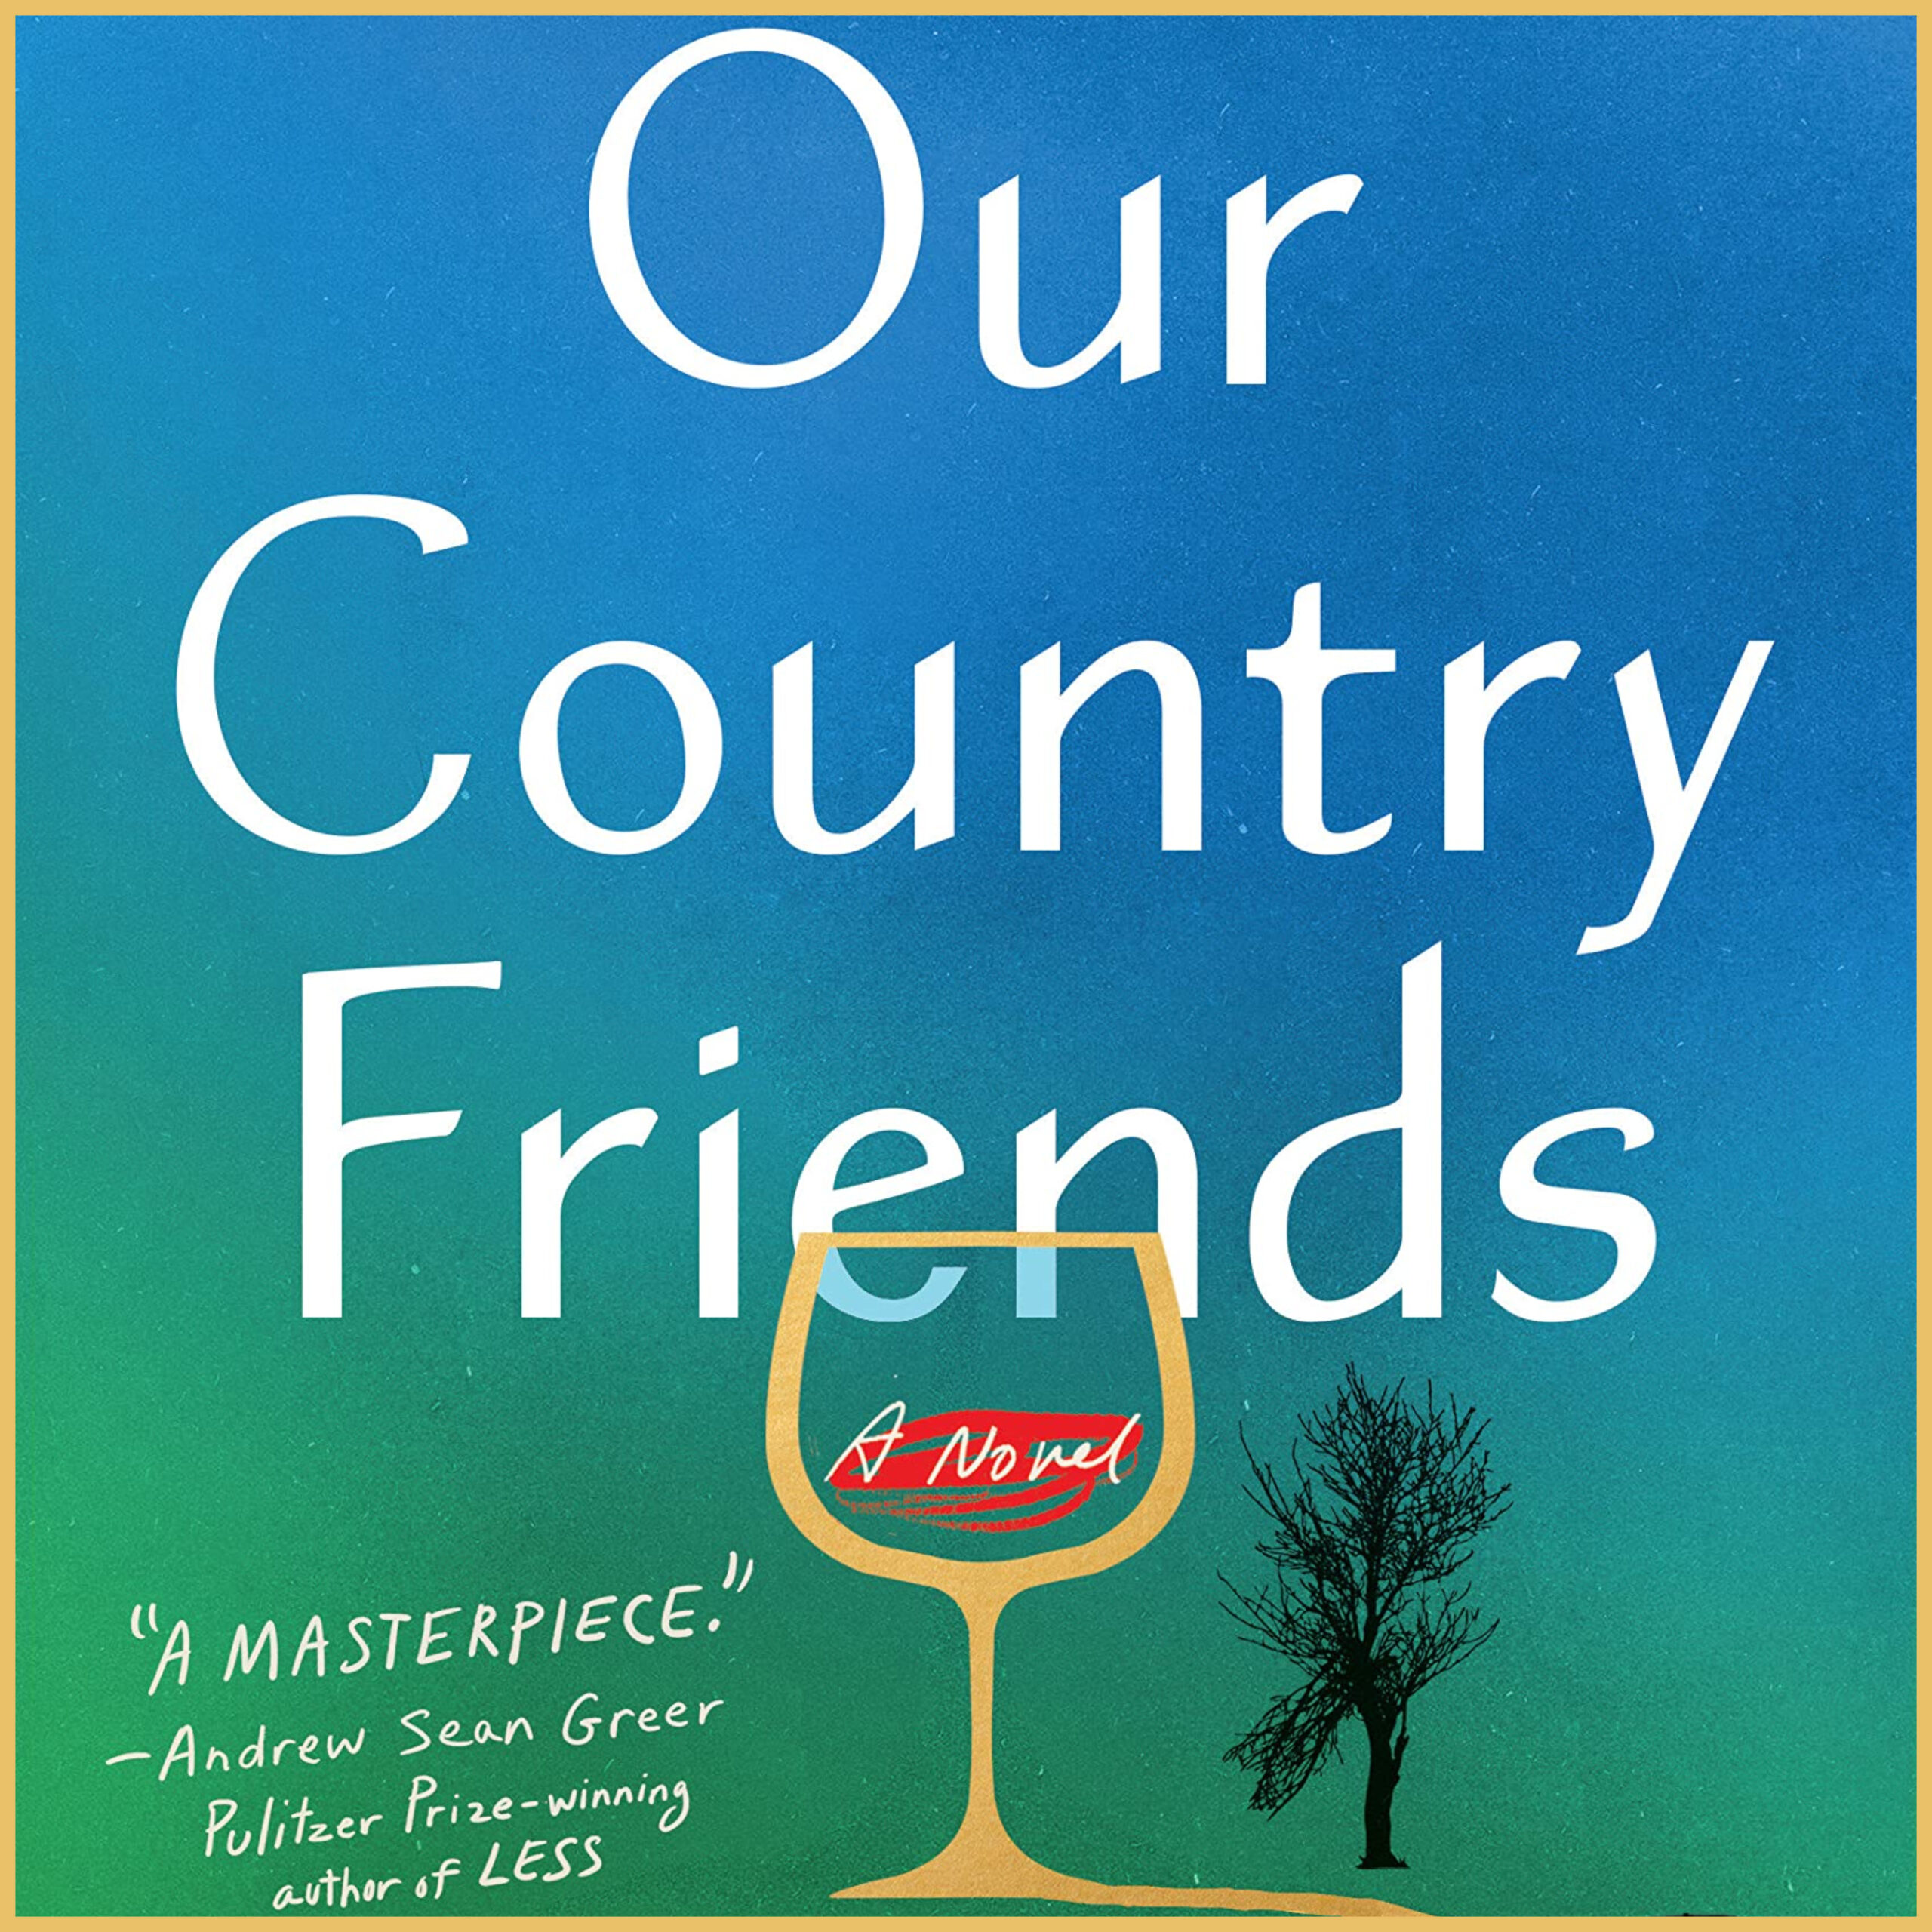 #1747: Gary Shteyngart's "Our Country Friends" | The Book Show